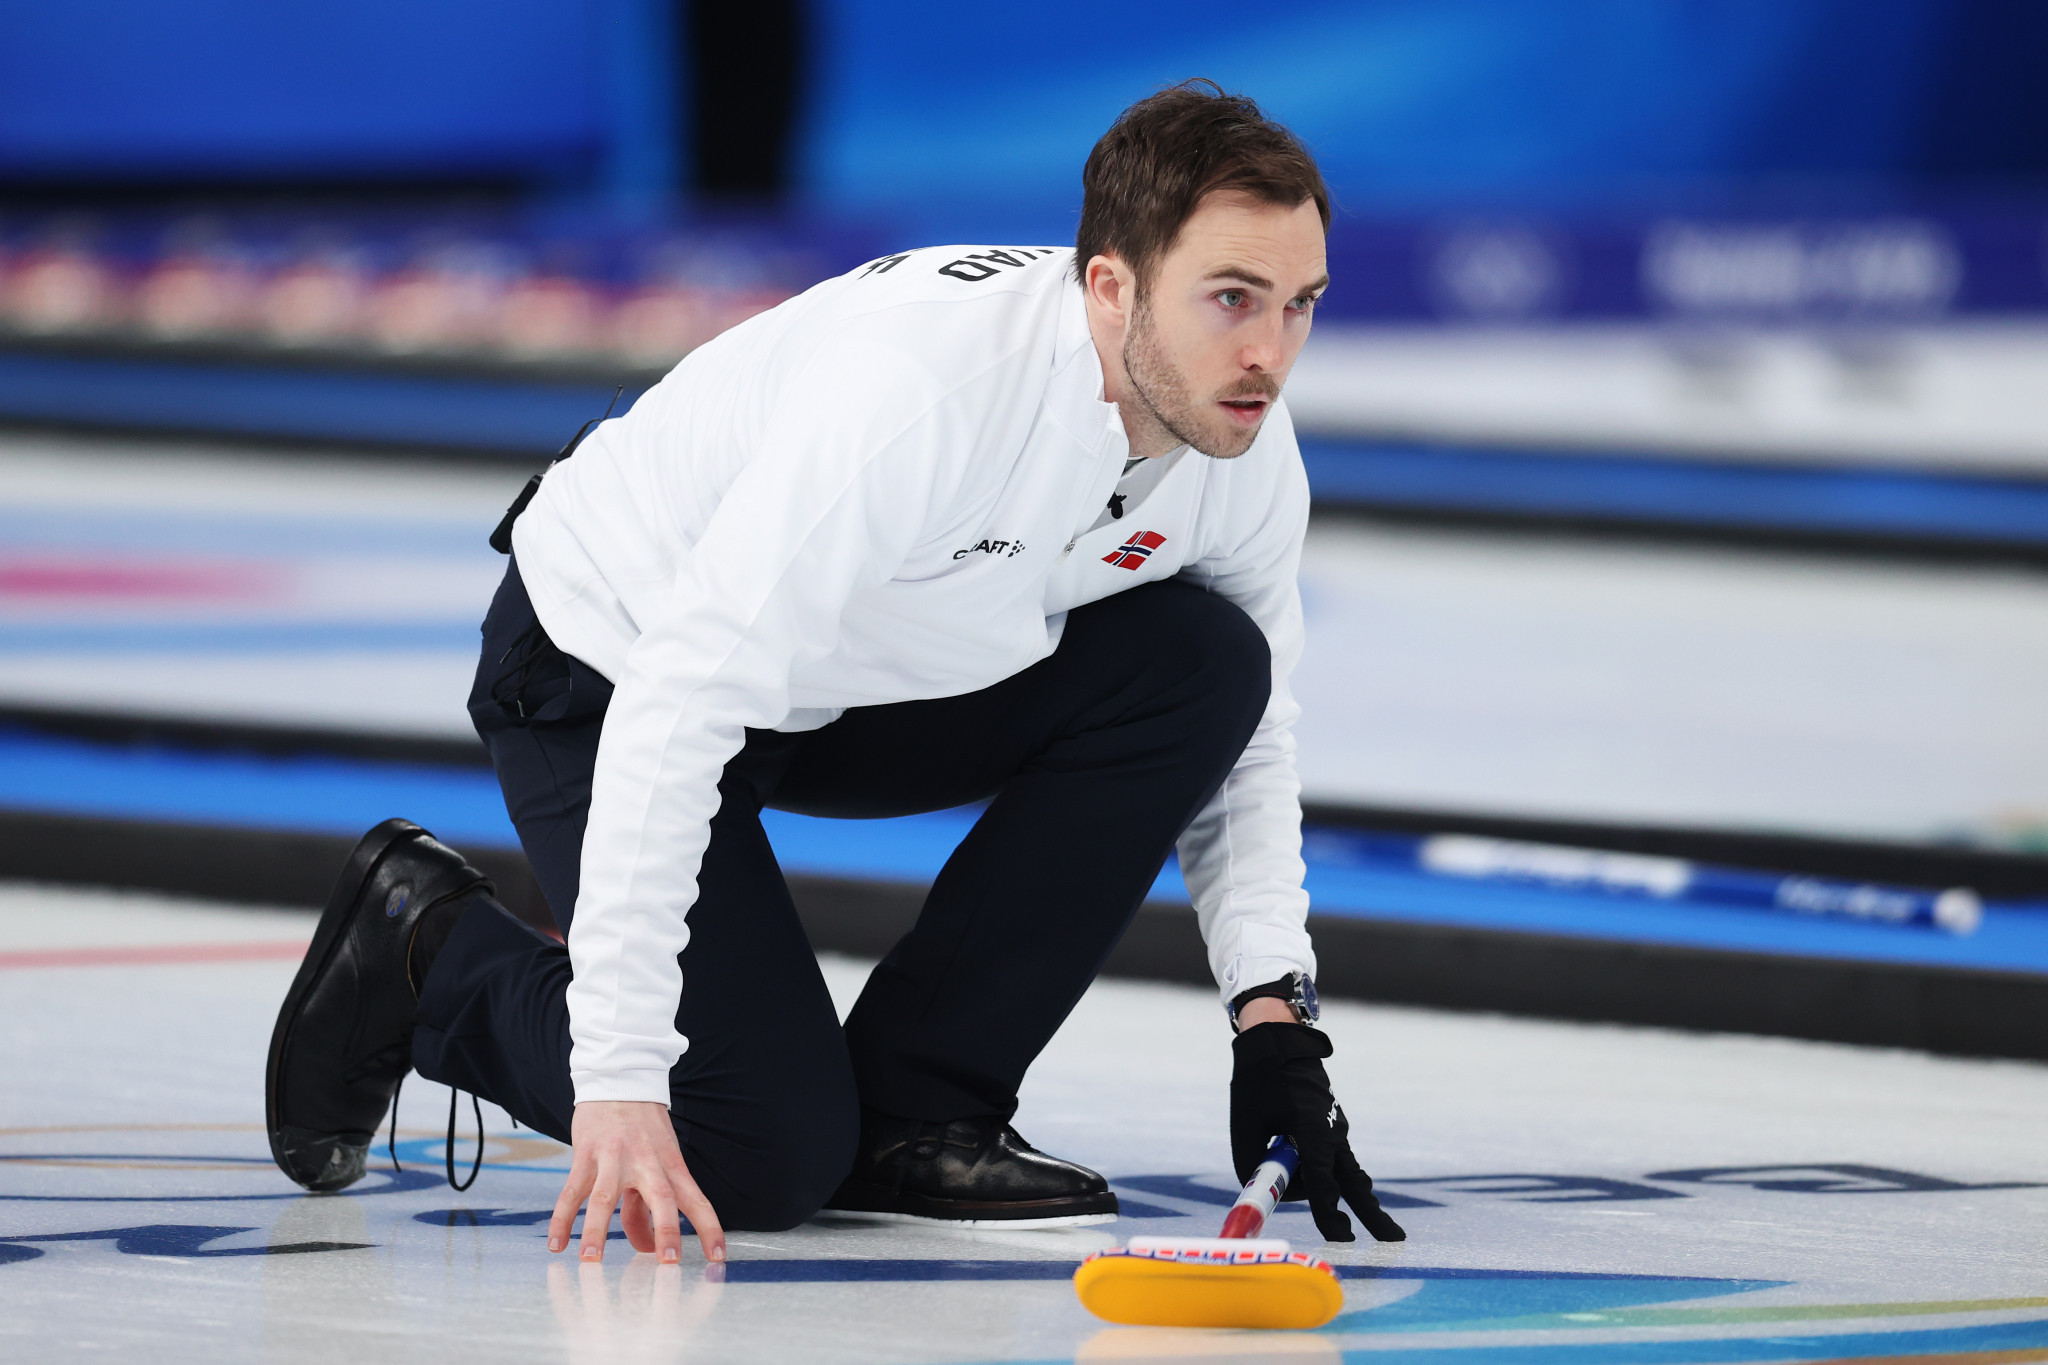 Steffen Walstad is hoping to lead Norway to a second World Mixed Curling Championship gold medal after playing a key role in the 2015 triumph ©Getty Images